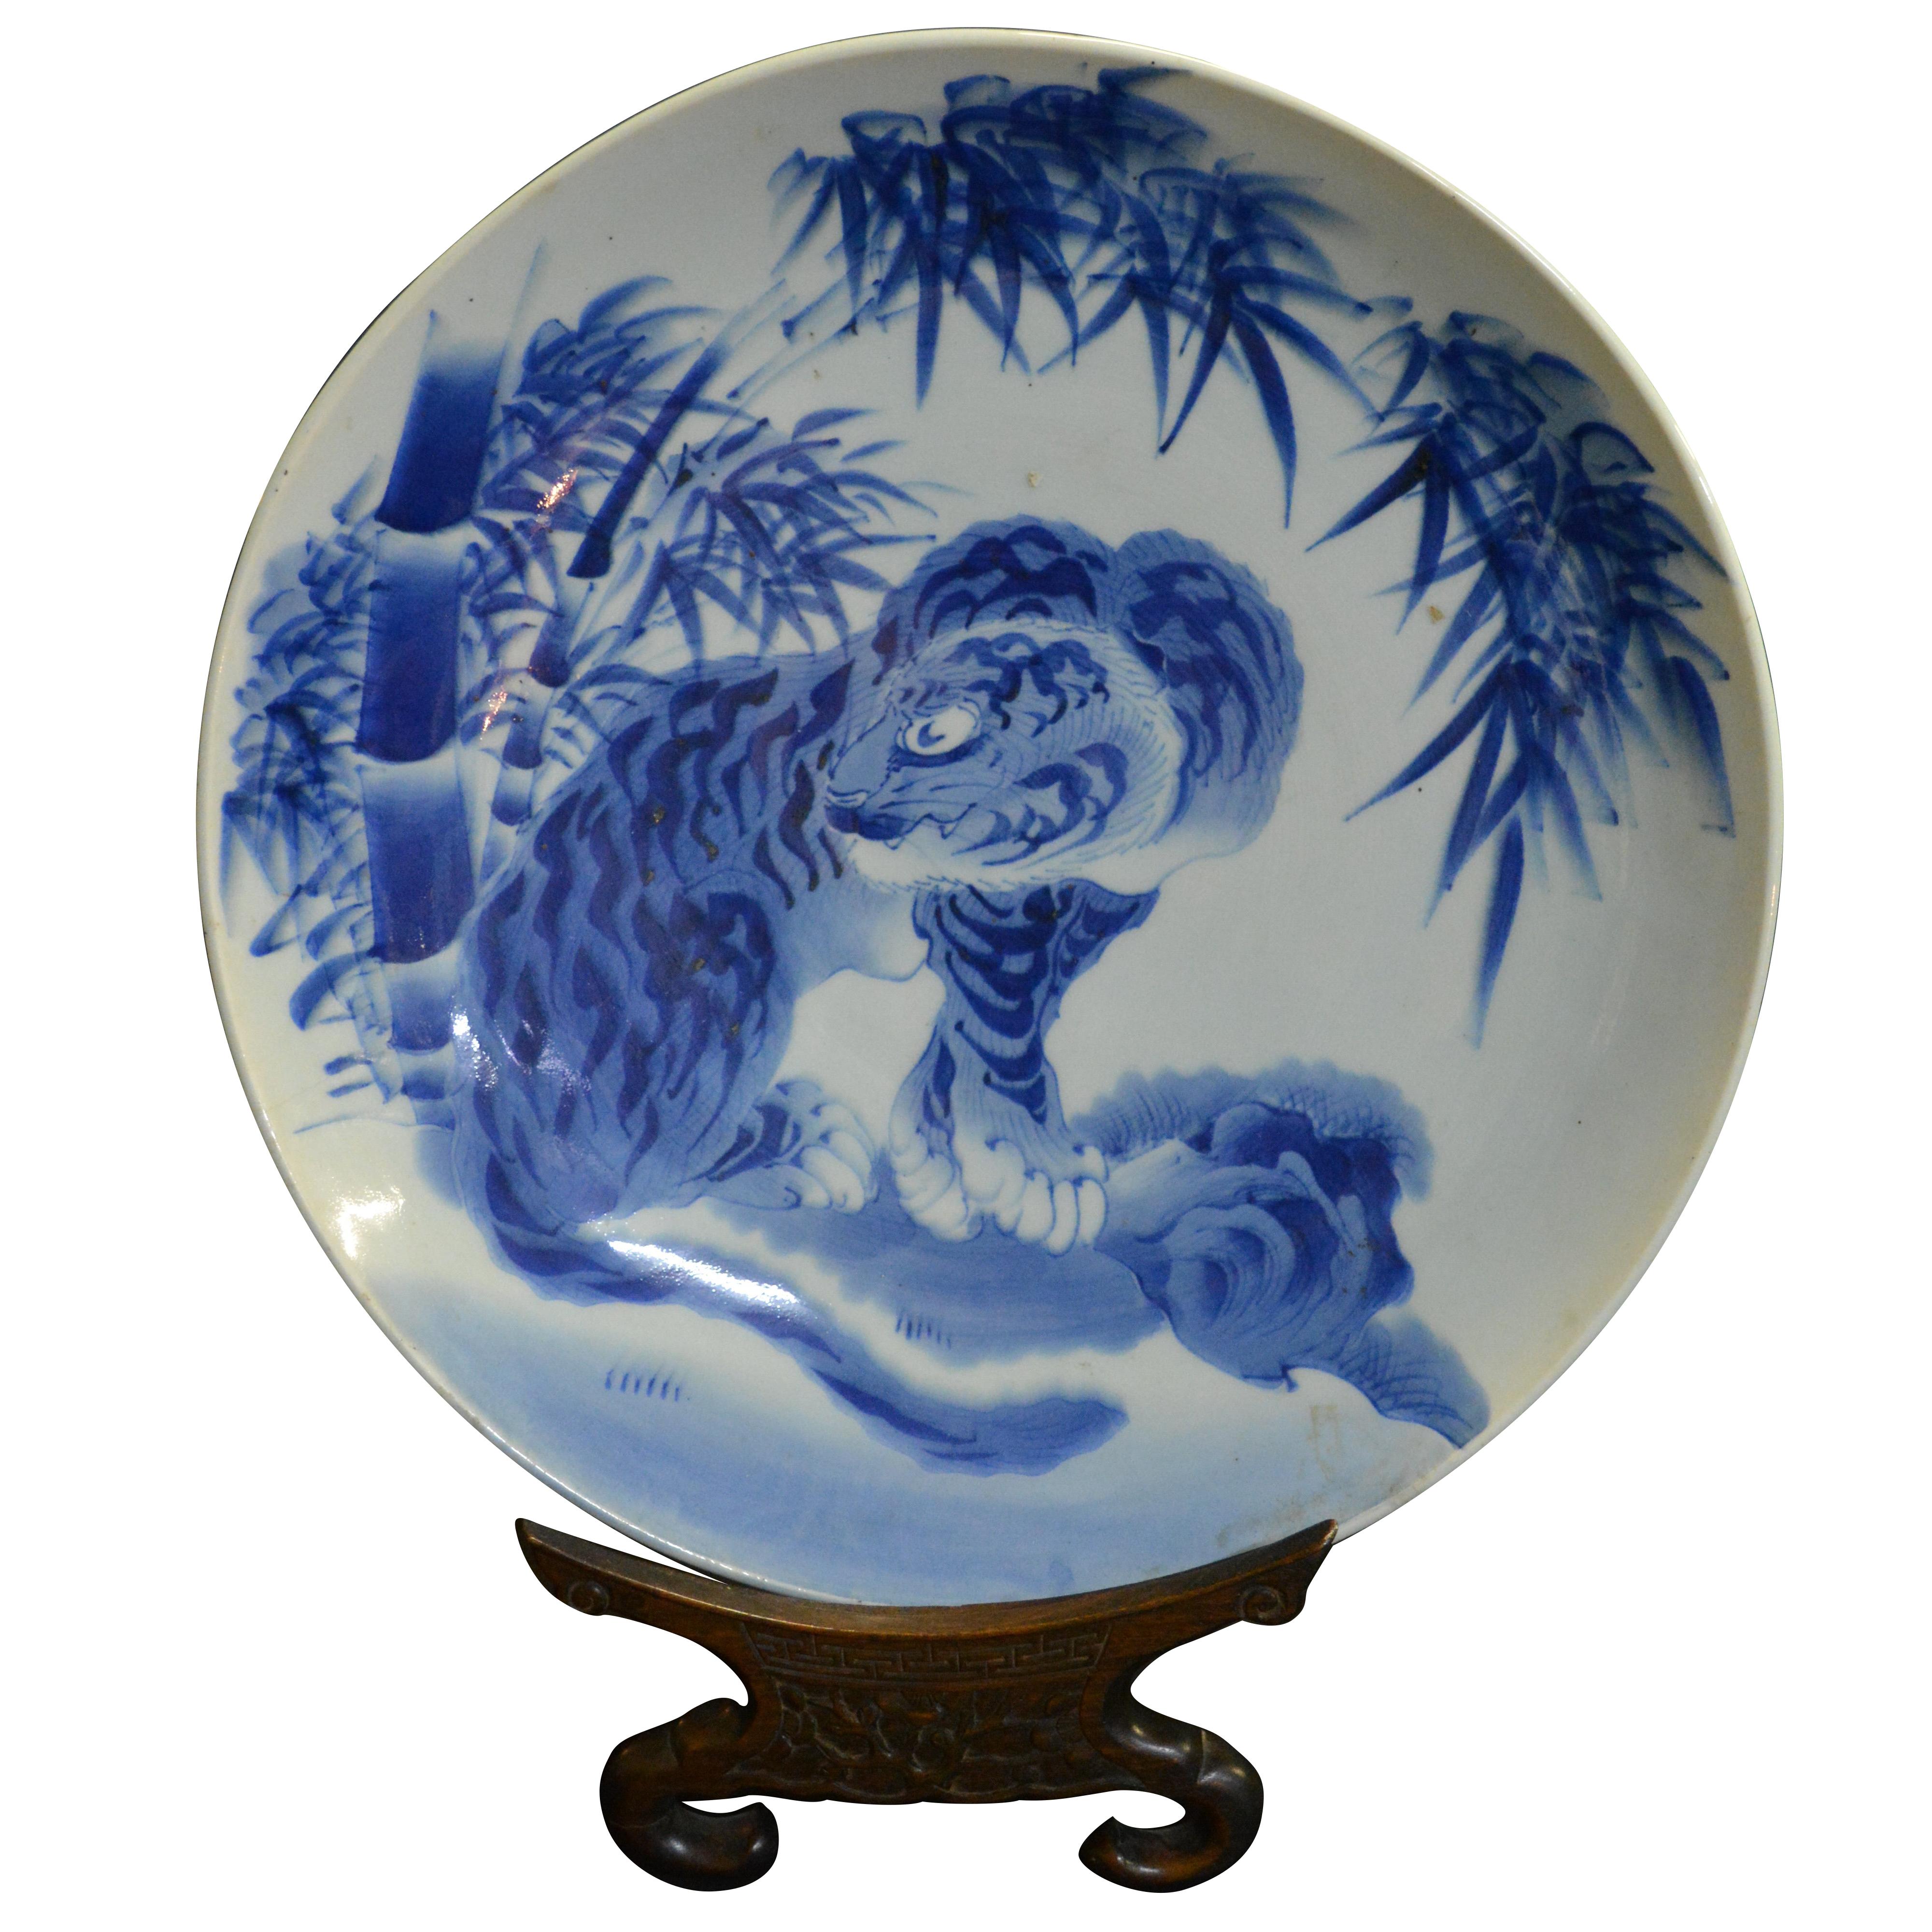 A charming very fine large Japanese porcelain charger. The thickly potted porcelain charger with underglaze landscape decoration, a Korean stylized tiger in landscape of graceful bamboo, unmarked. Stand not included.

Provenance: Assembled from our